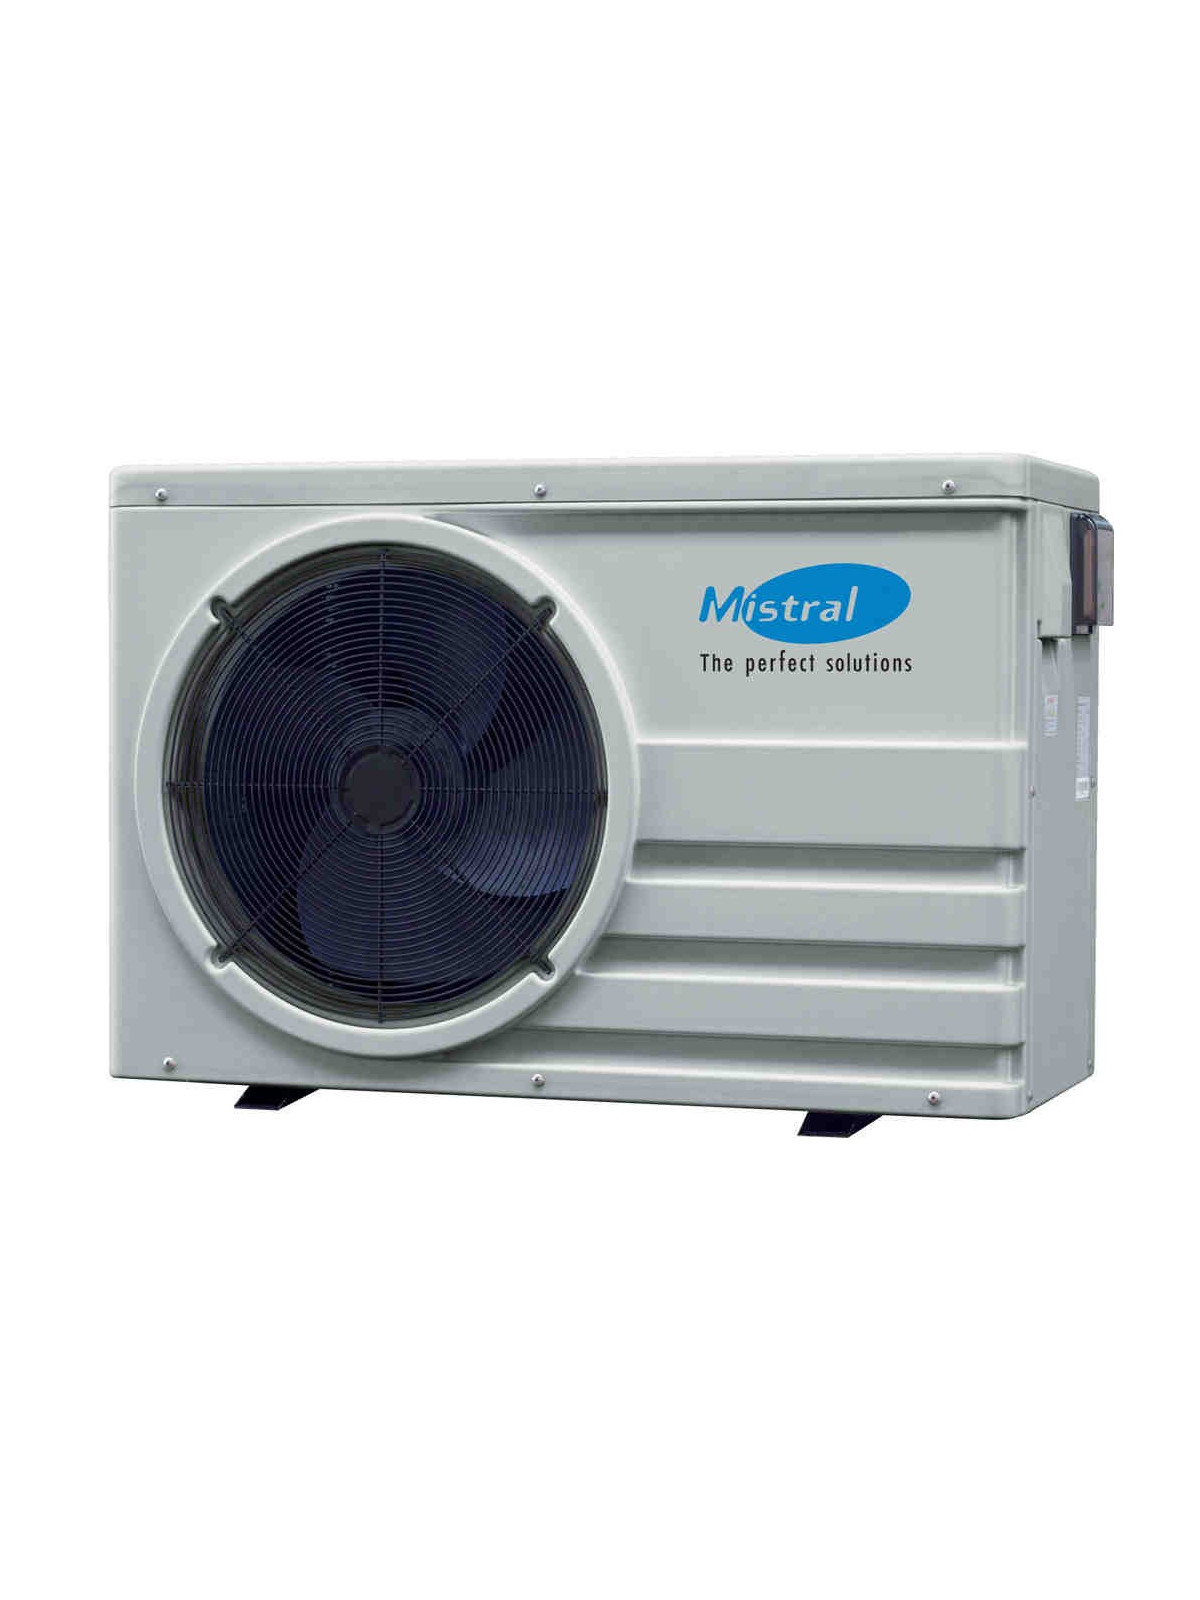 Heat pump for swimming pool Mistral SWI 6.5, 9, 11.5 or 14kW